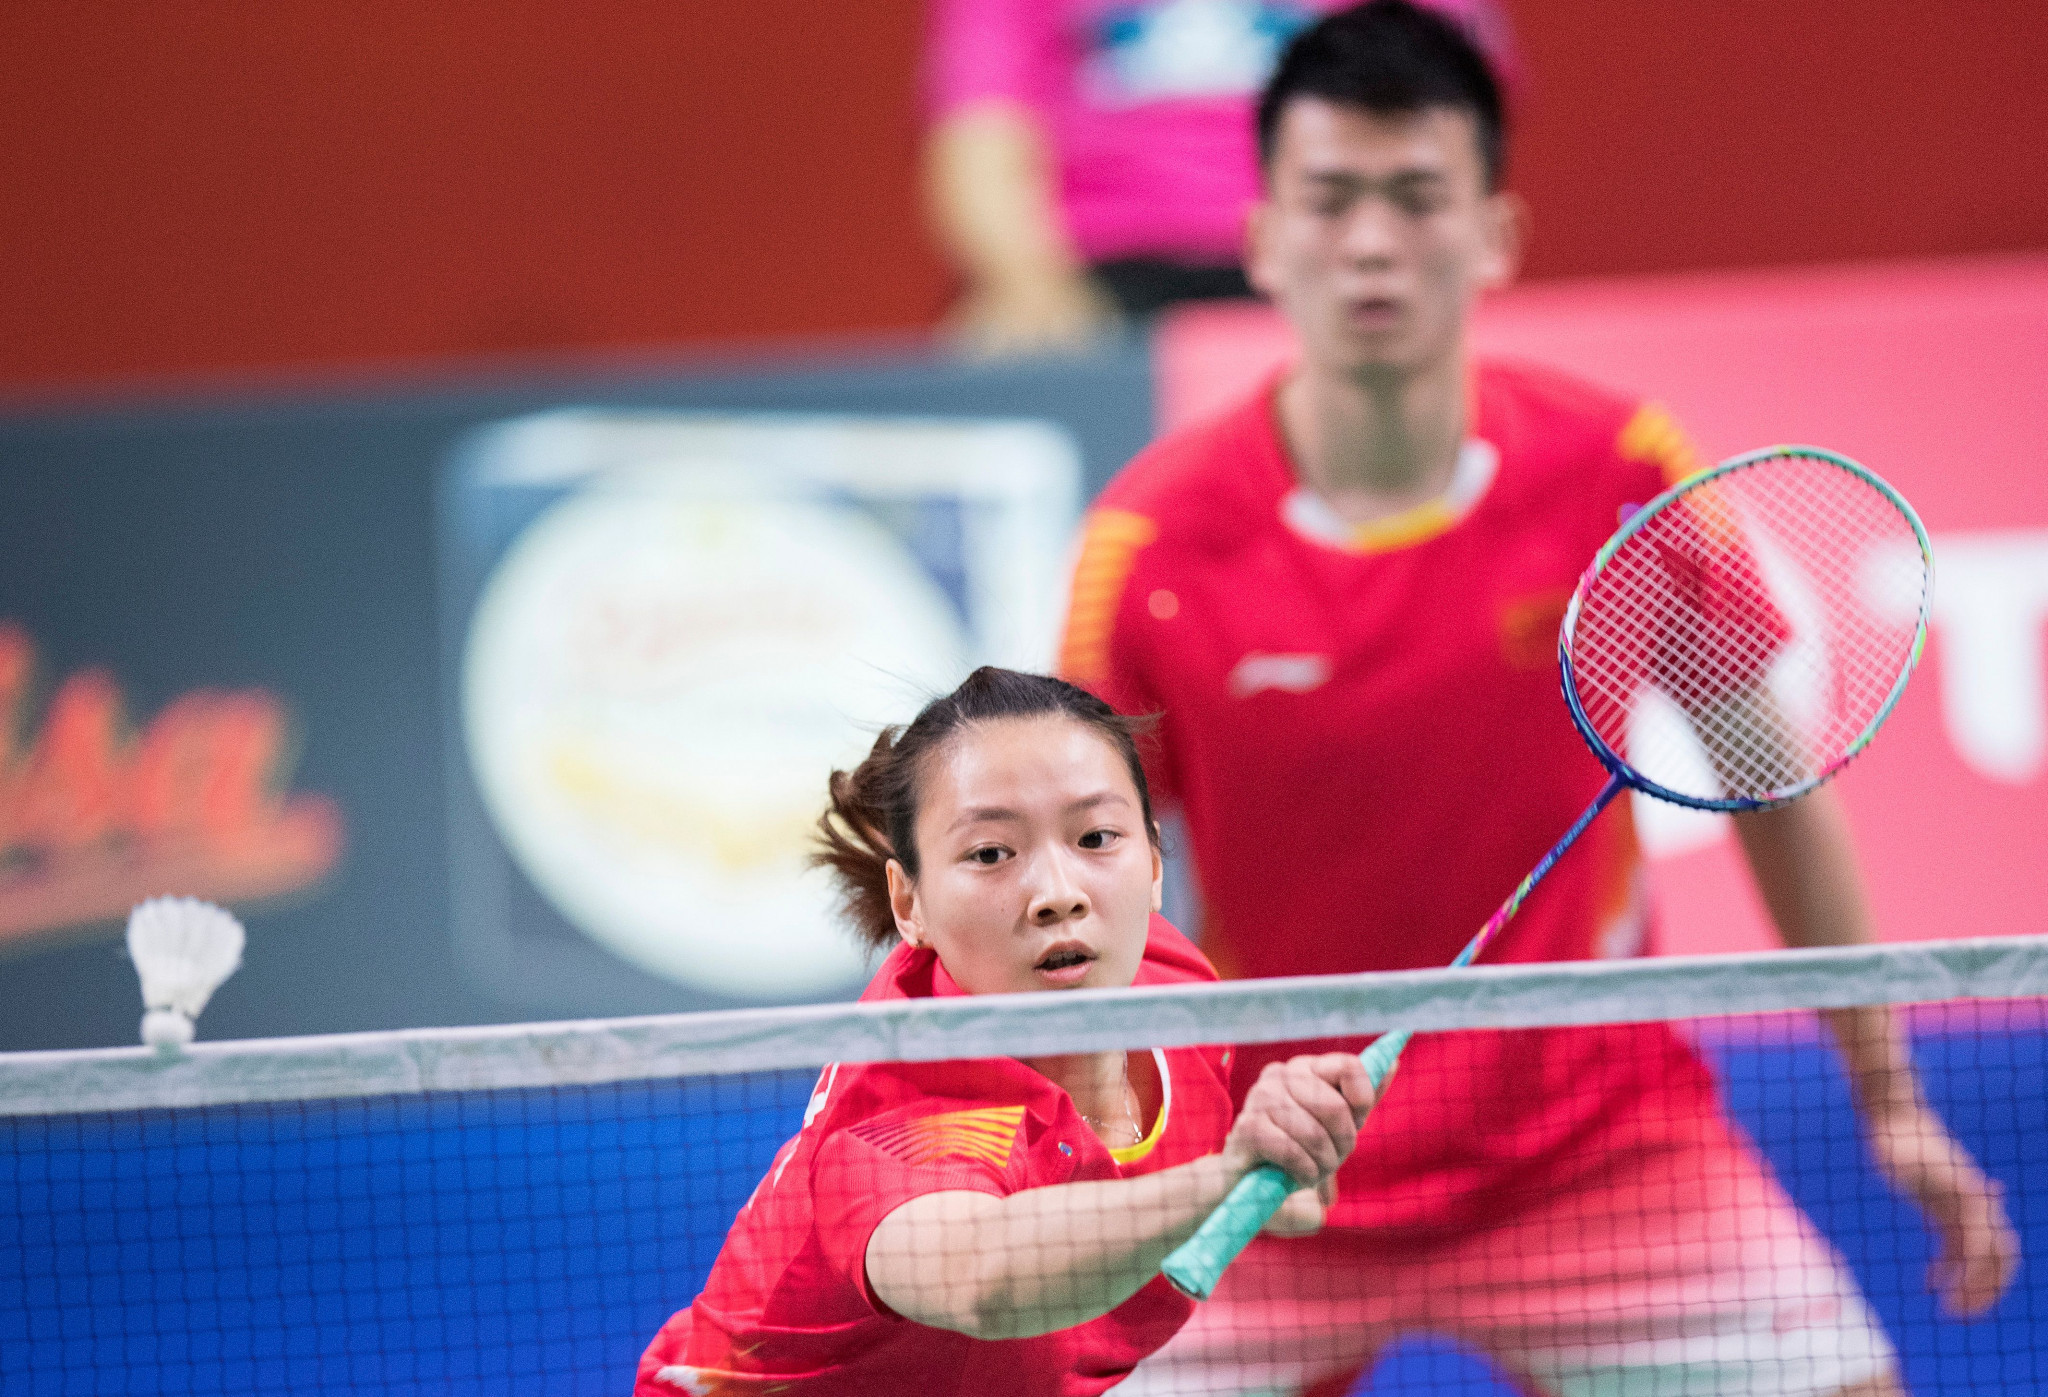 Zheng Siwei and Huang Yaqiong secured the mixed doubles title at their home event ©Getty Images